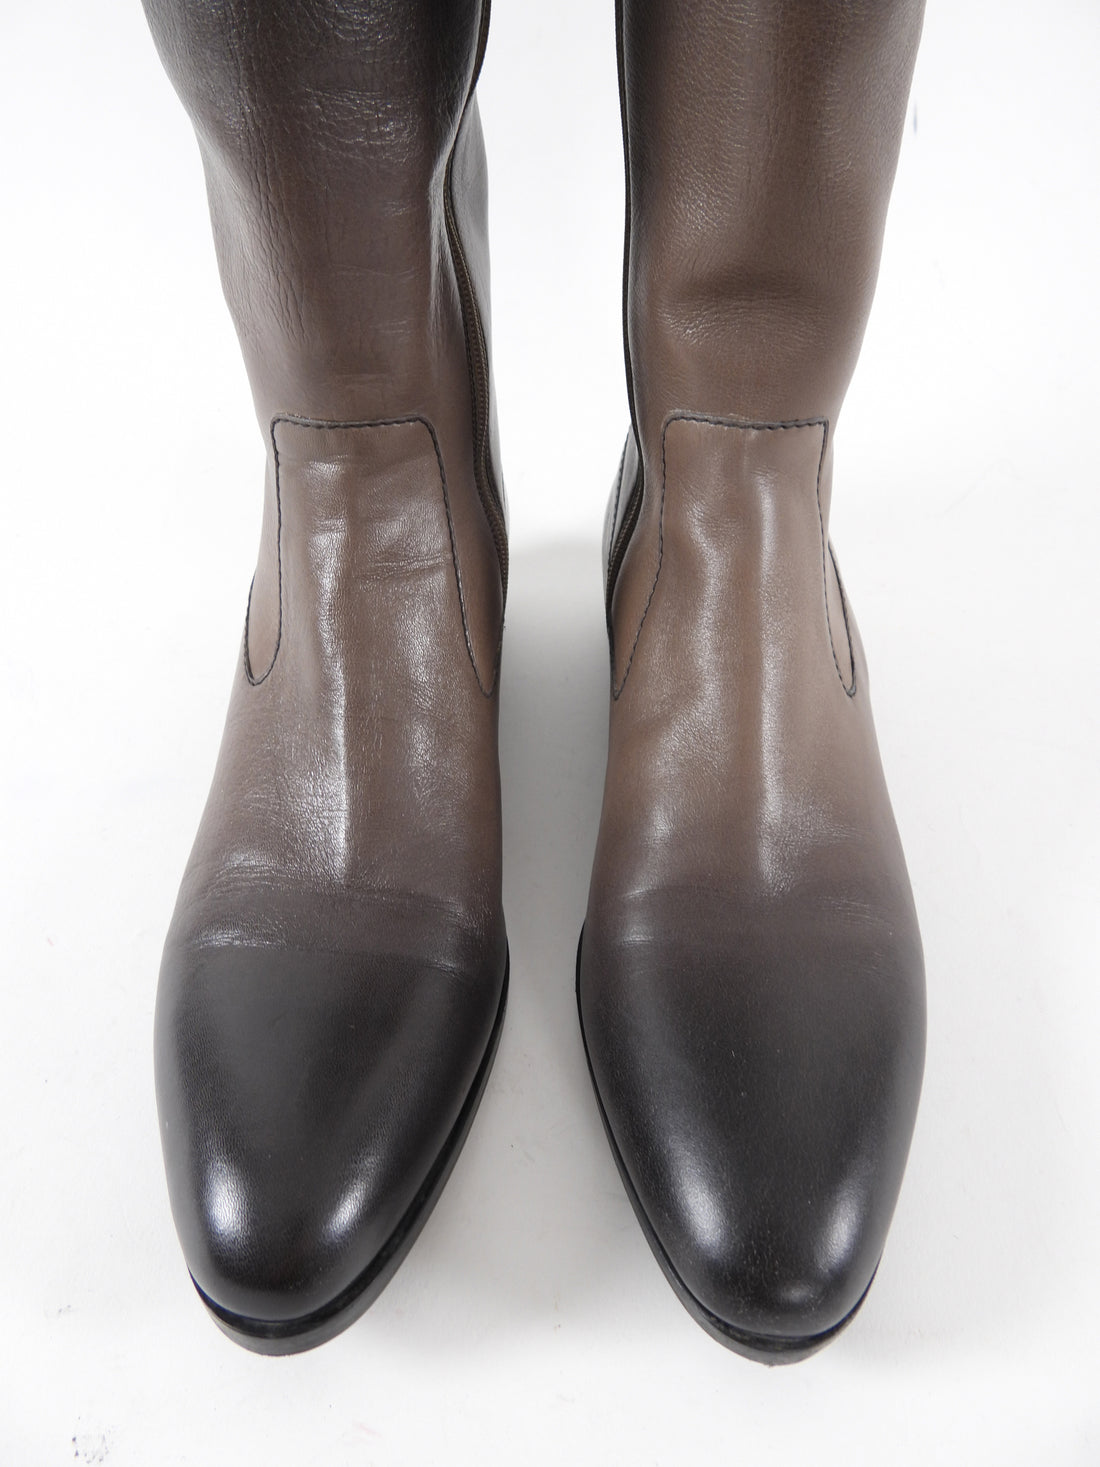 Prada Ombre Leather Tall Boots - USA 7.5